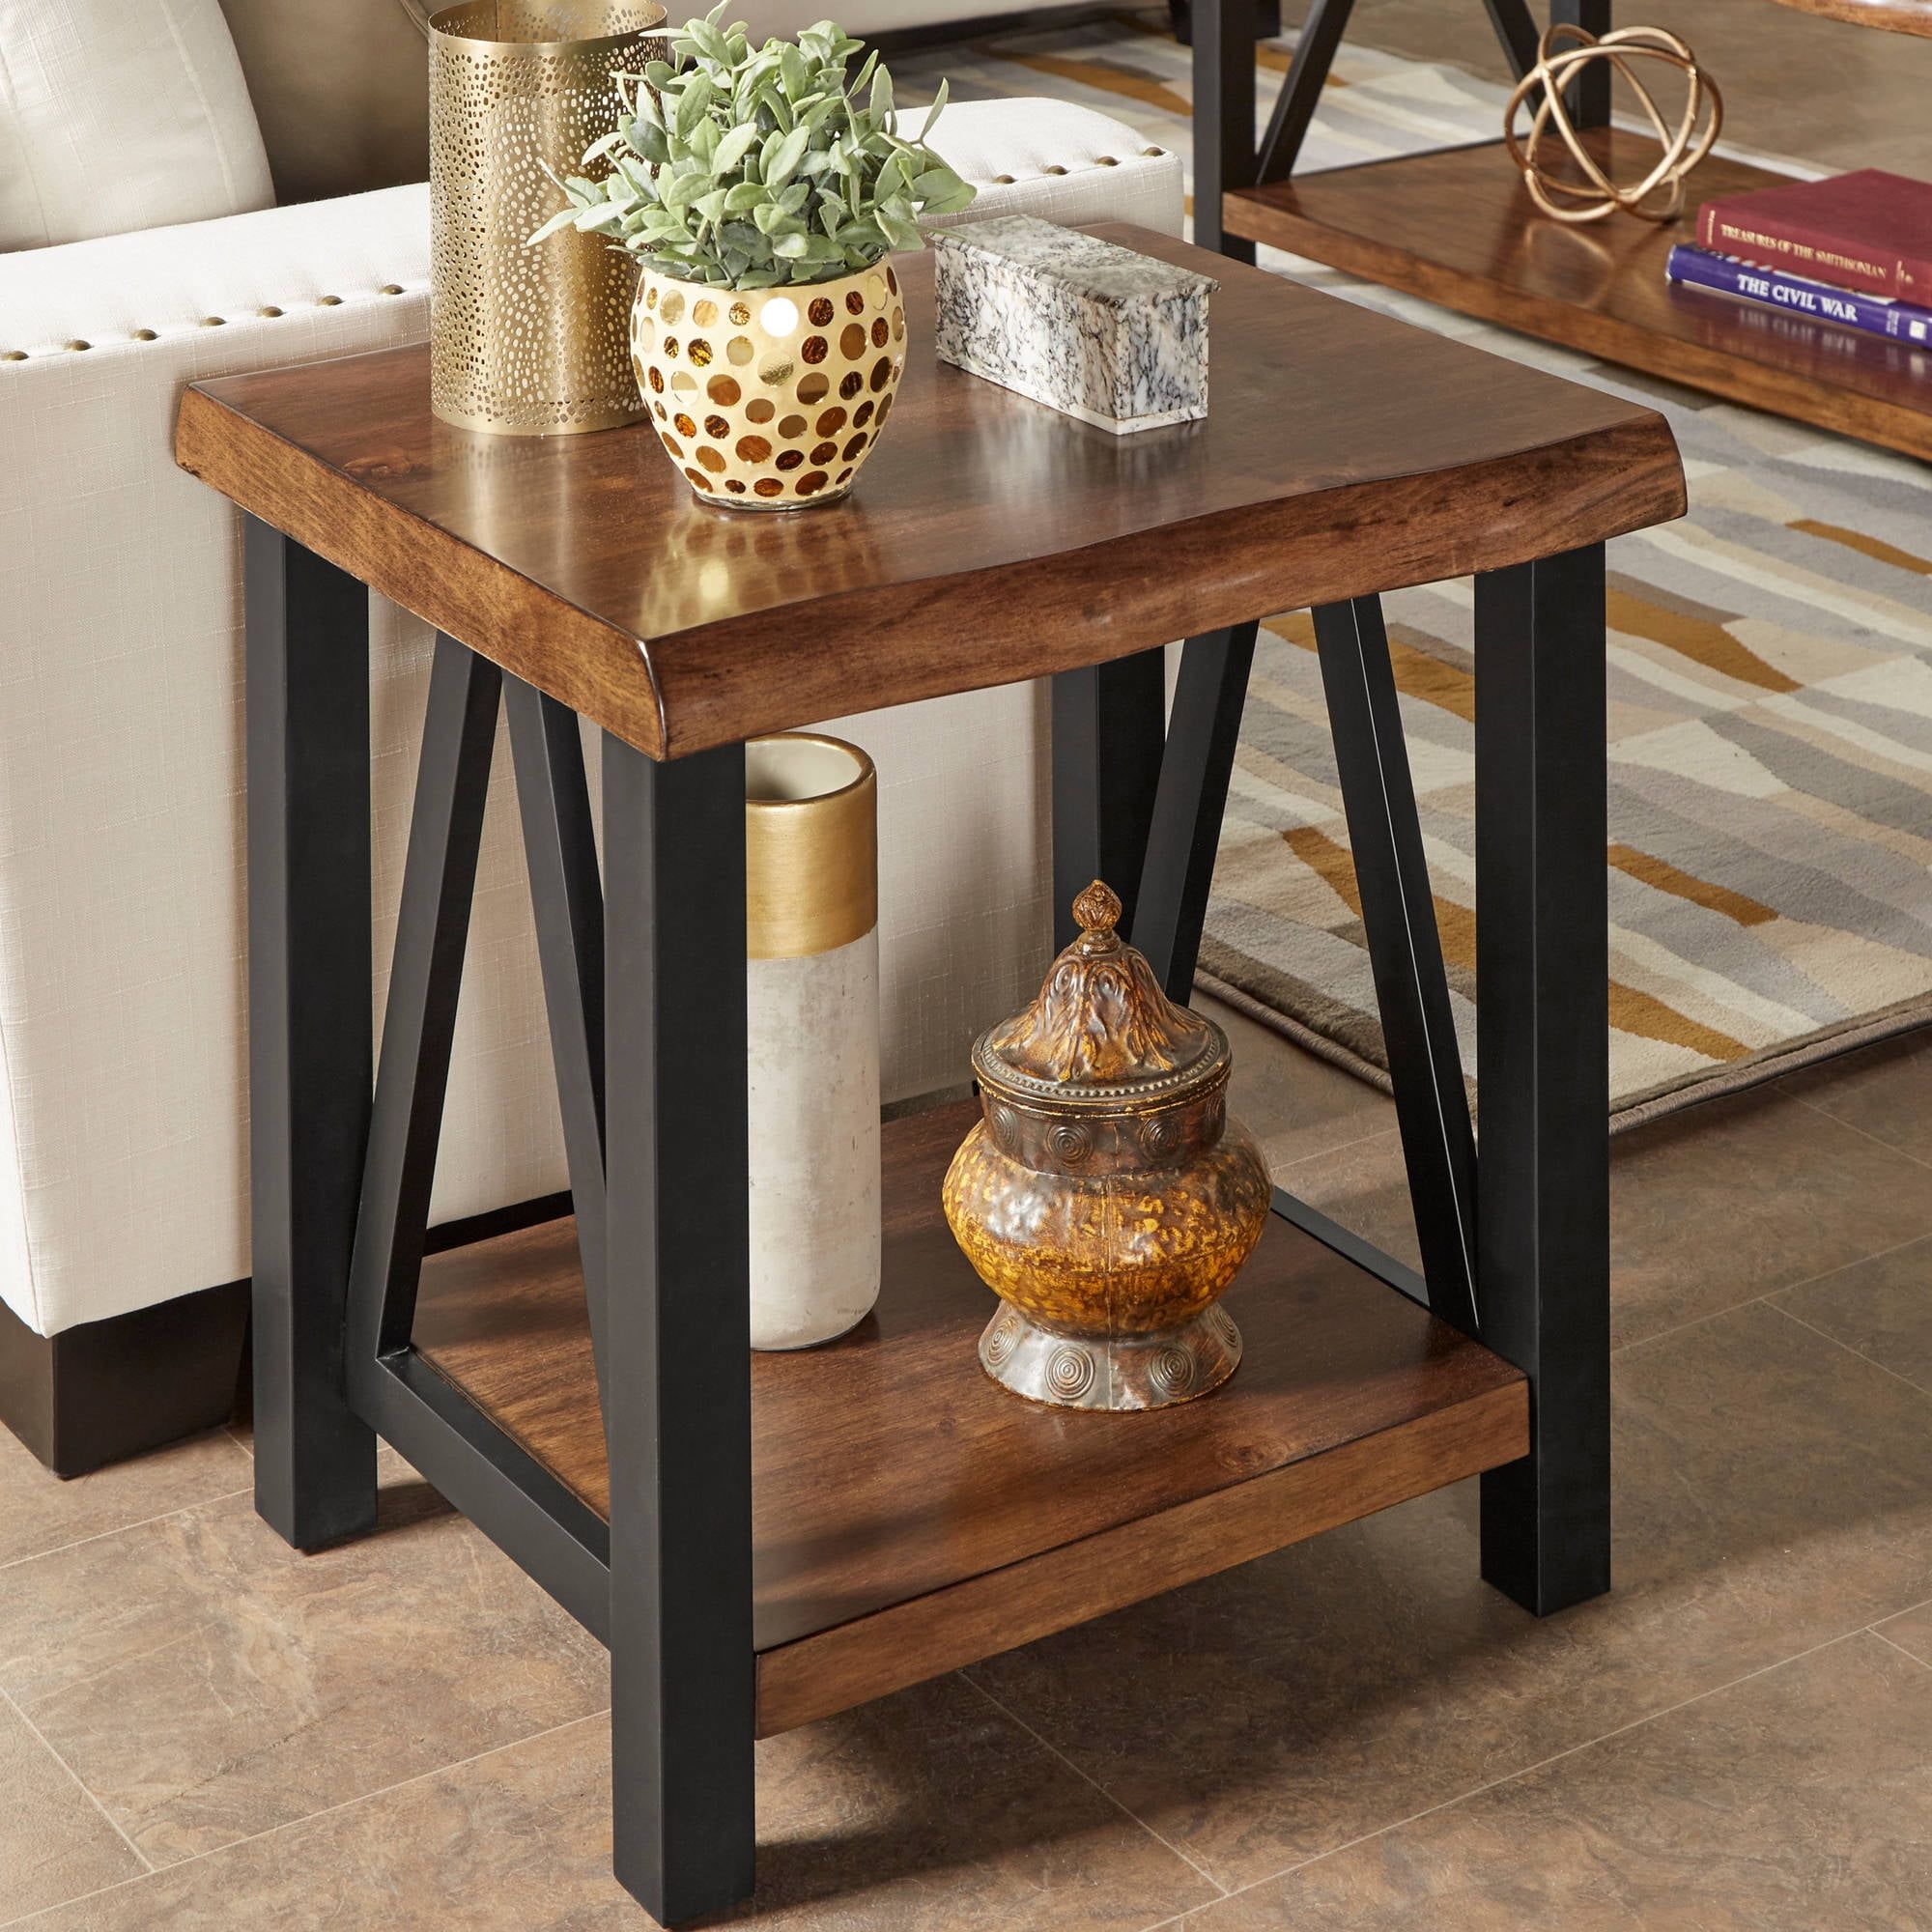 Weston Home Rustic Metal Base End Table With Natural Edge Table Top And Inside Metal Side Tables For Living Spaces (View 2 of 20)